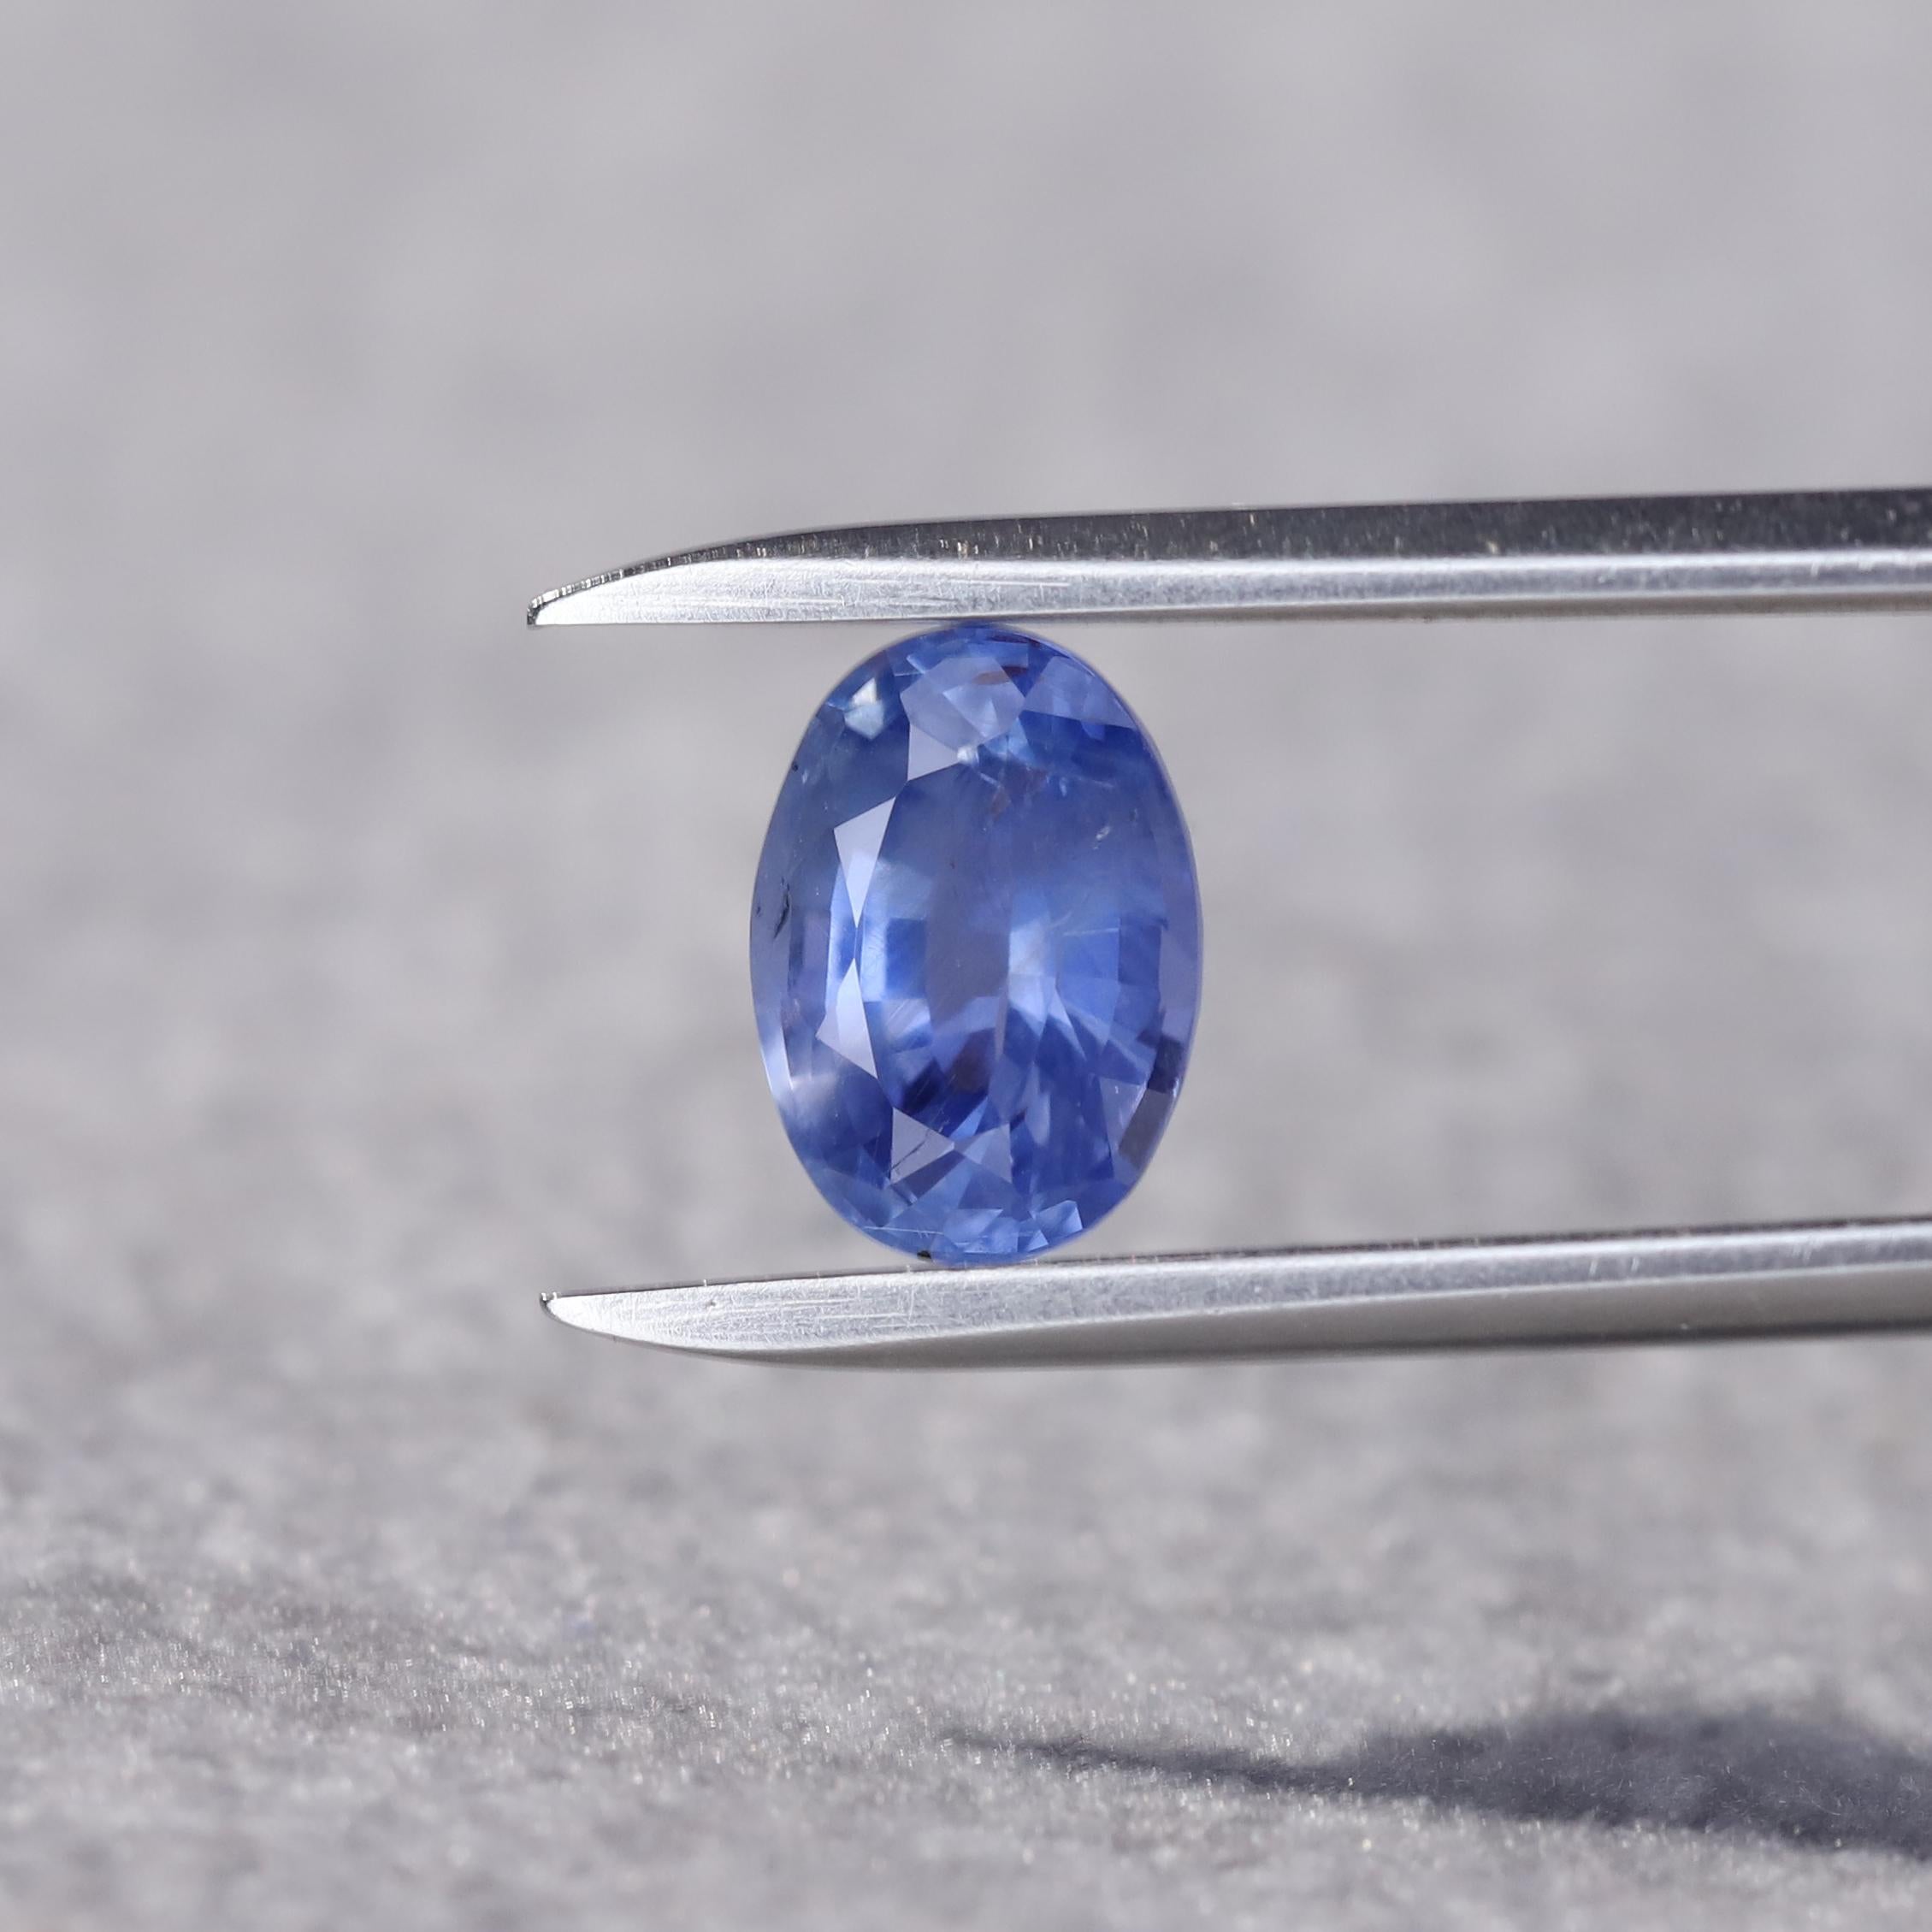 A cornflower blue sapphire graced by distinctive, silk inclusions. These silk inclusions hold a vital role in the world of gemology, serving as a key indicator of the sapphire’s natural and unheated status. While they contribute to a subtle,